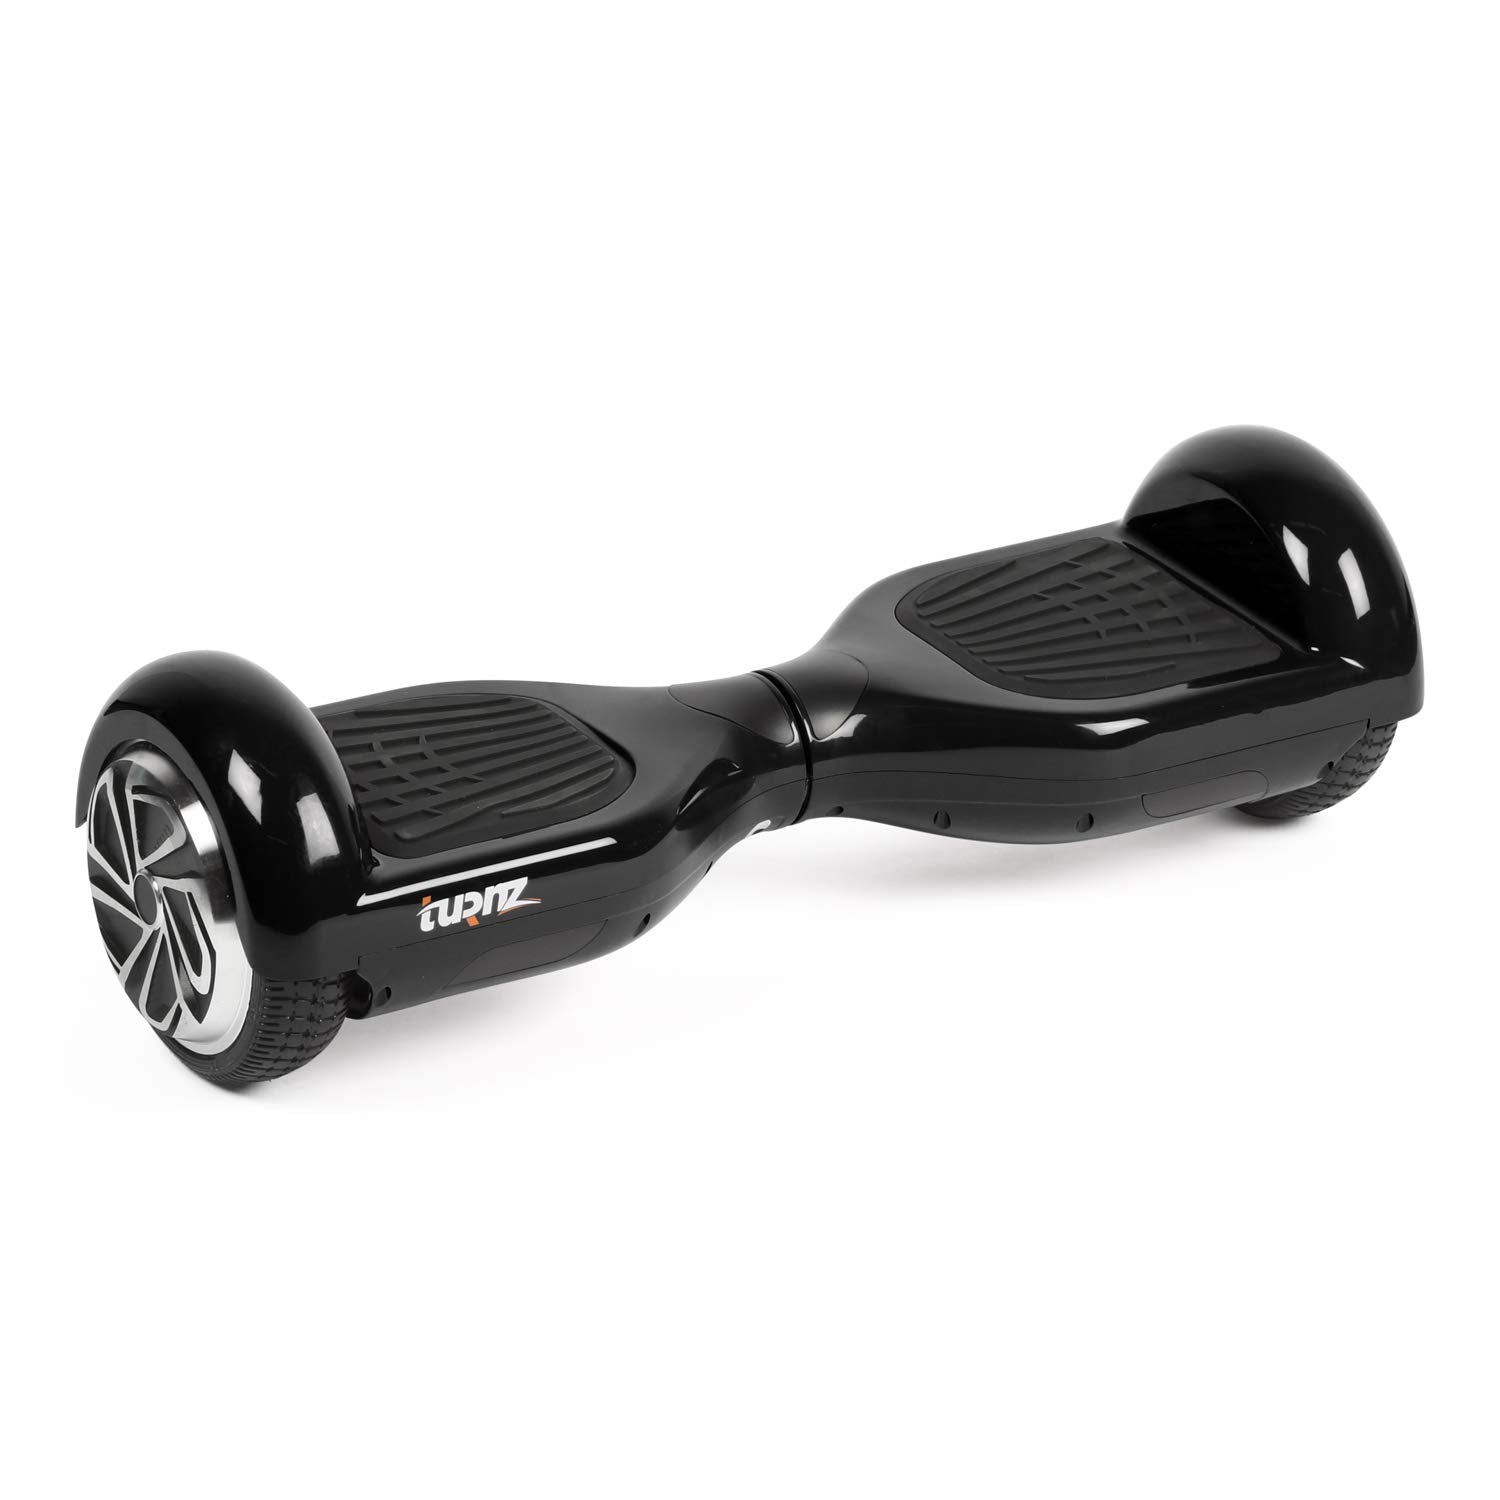 tuRnz Valley650 Self Balancing Hoverboard, 500W Power, UL 2272 Certified, Bluetooth Speaker, Exceptional Long Range Ride (15.5 Miles)  - Very Good